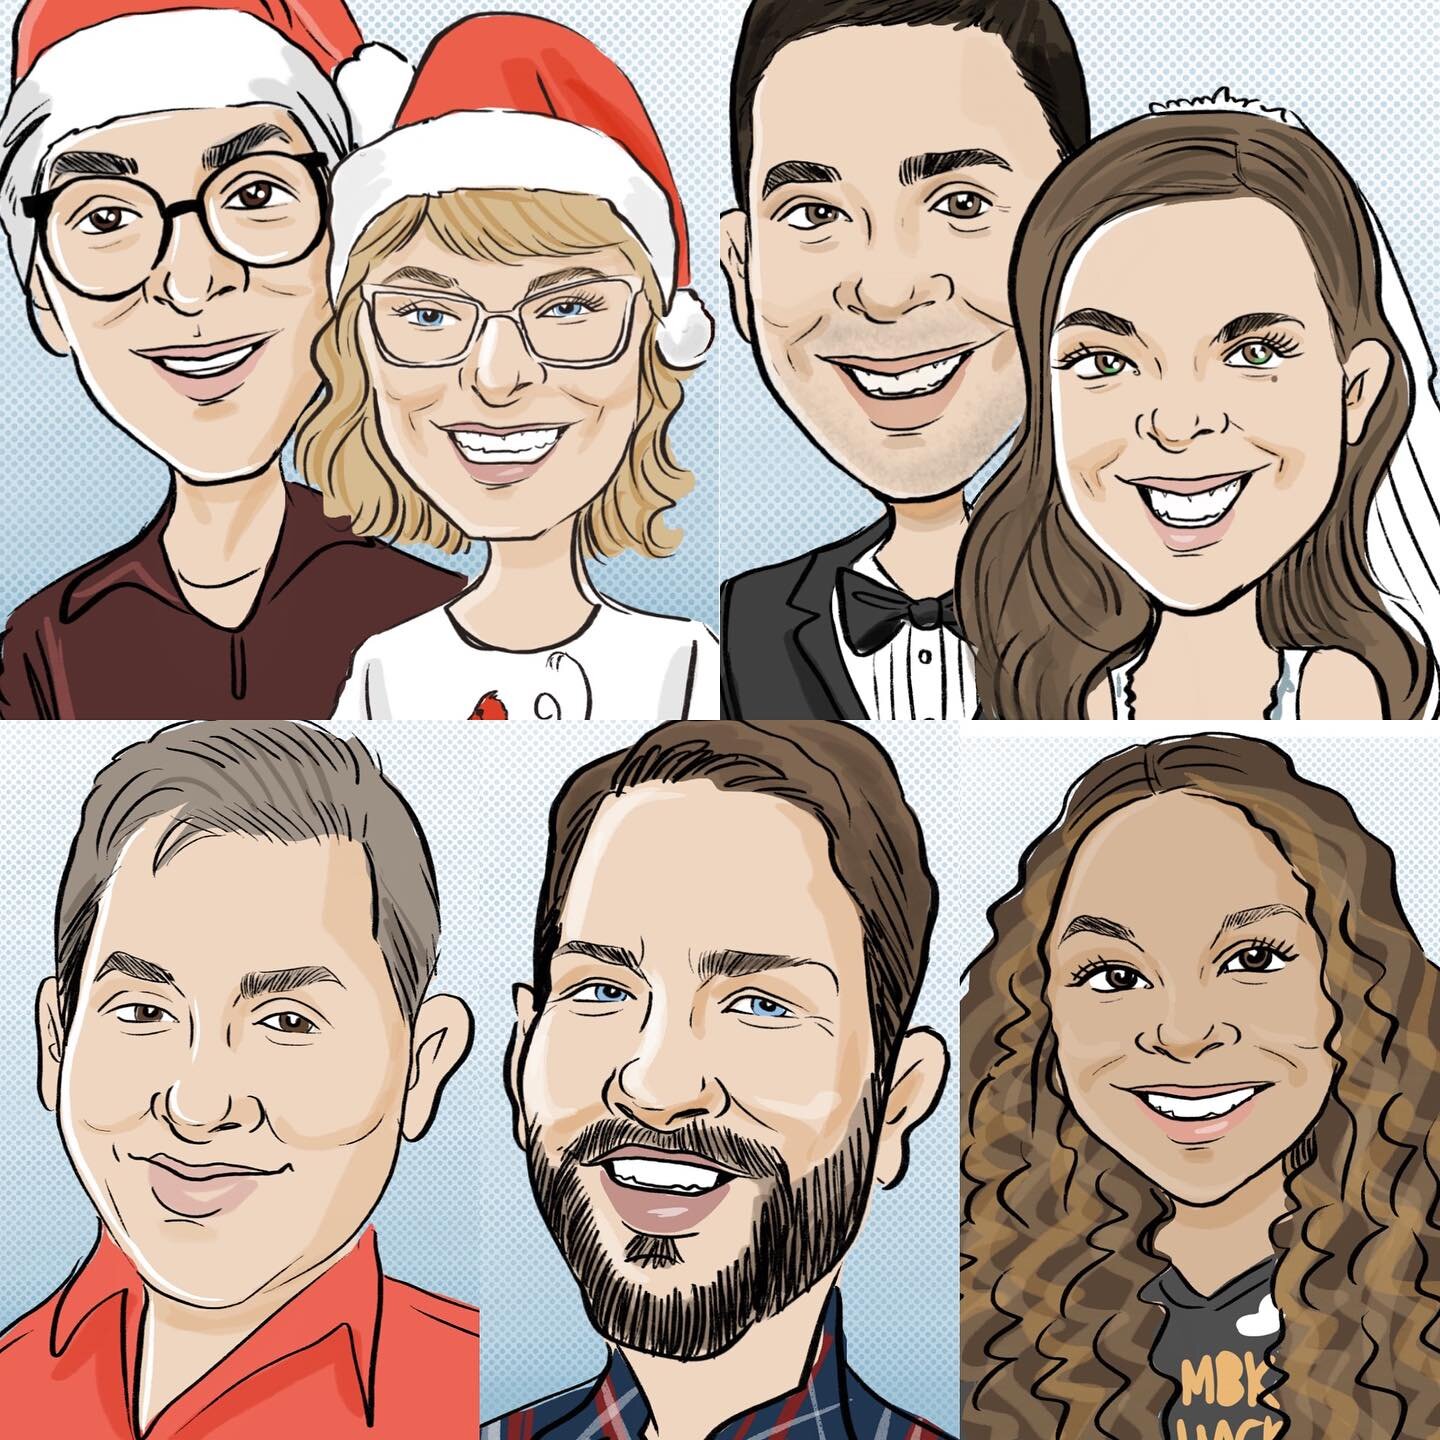 That&rsquo;s a wrap on digital events for the year! Just four more events to go til I&rsquo;m drawing into 2024 🙃 
.
.
.
.
#holidayparty #caricaturesbycourtney #ipadcaricature #digitalcaricature #caricaturist